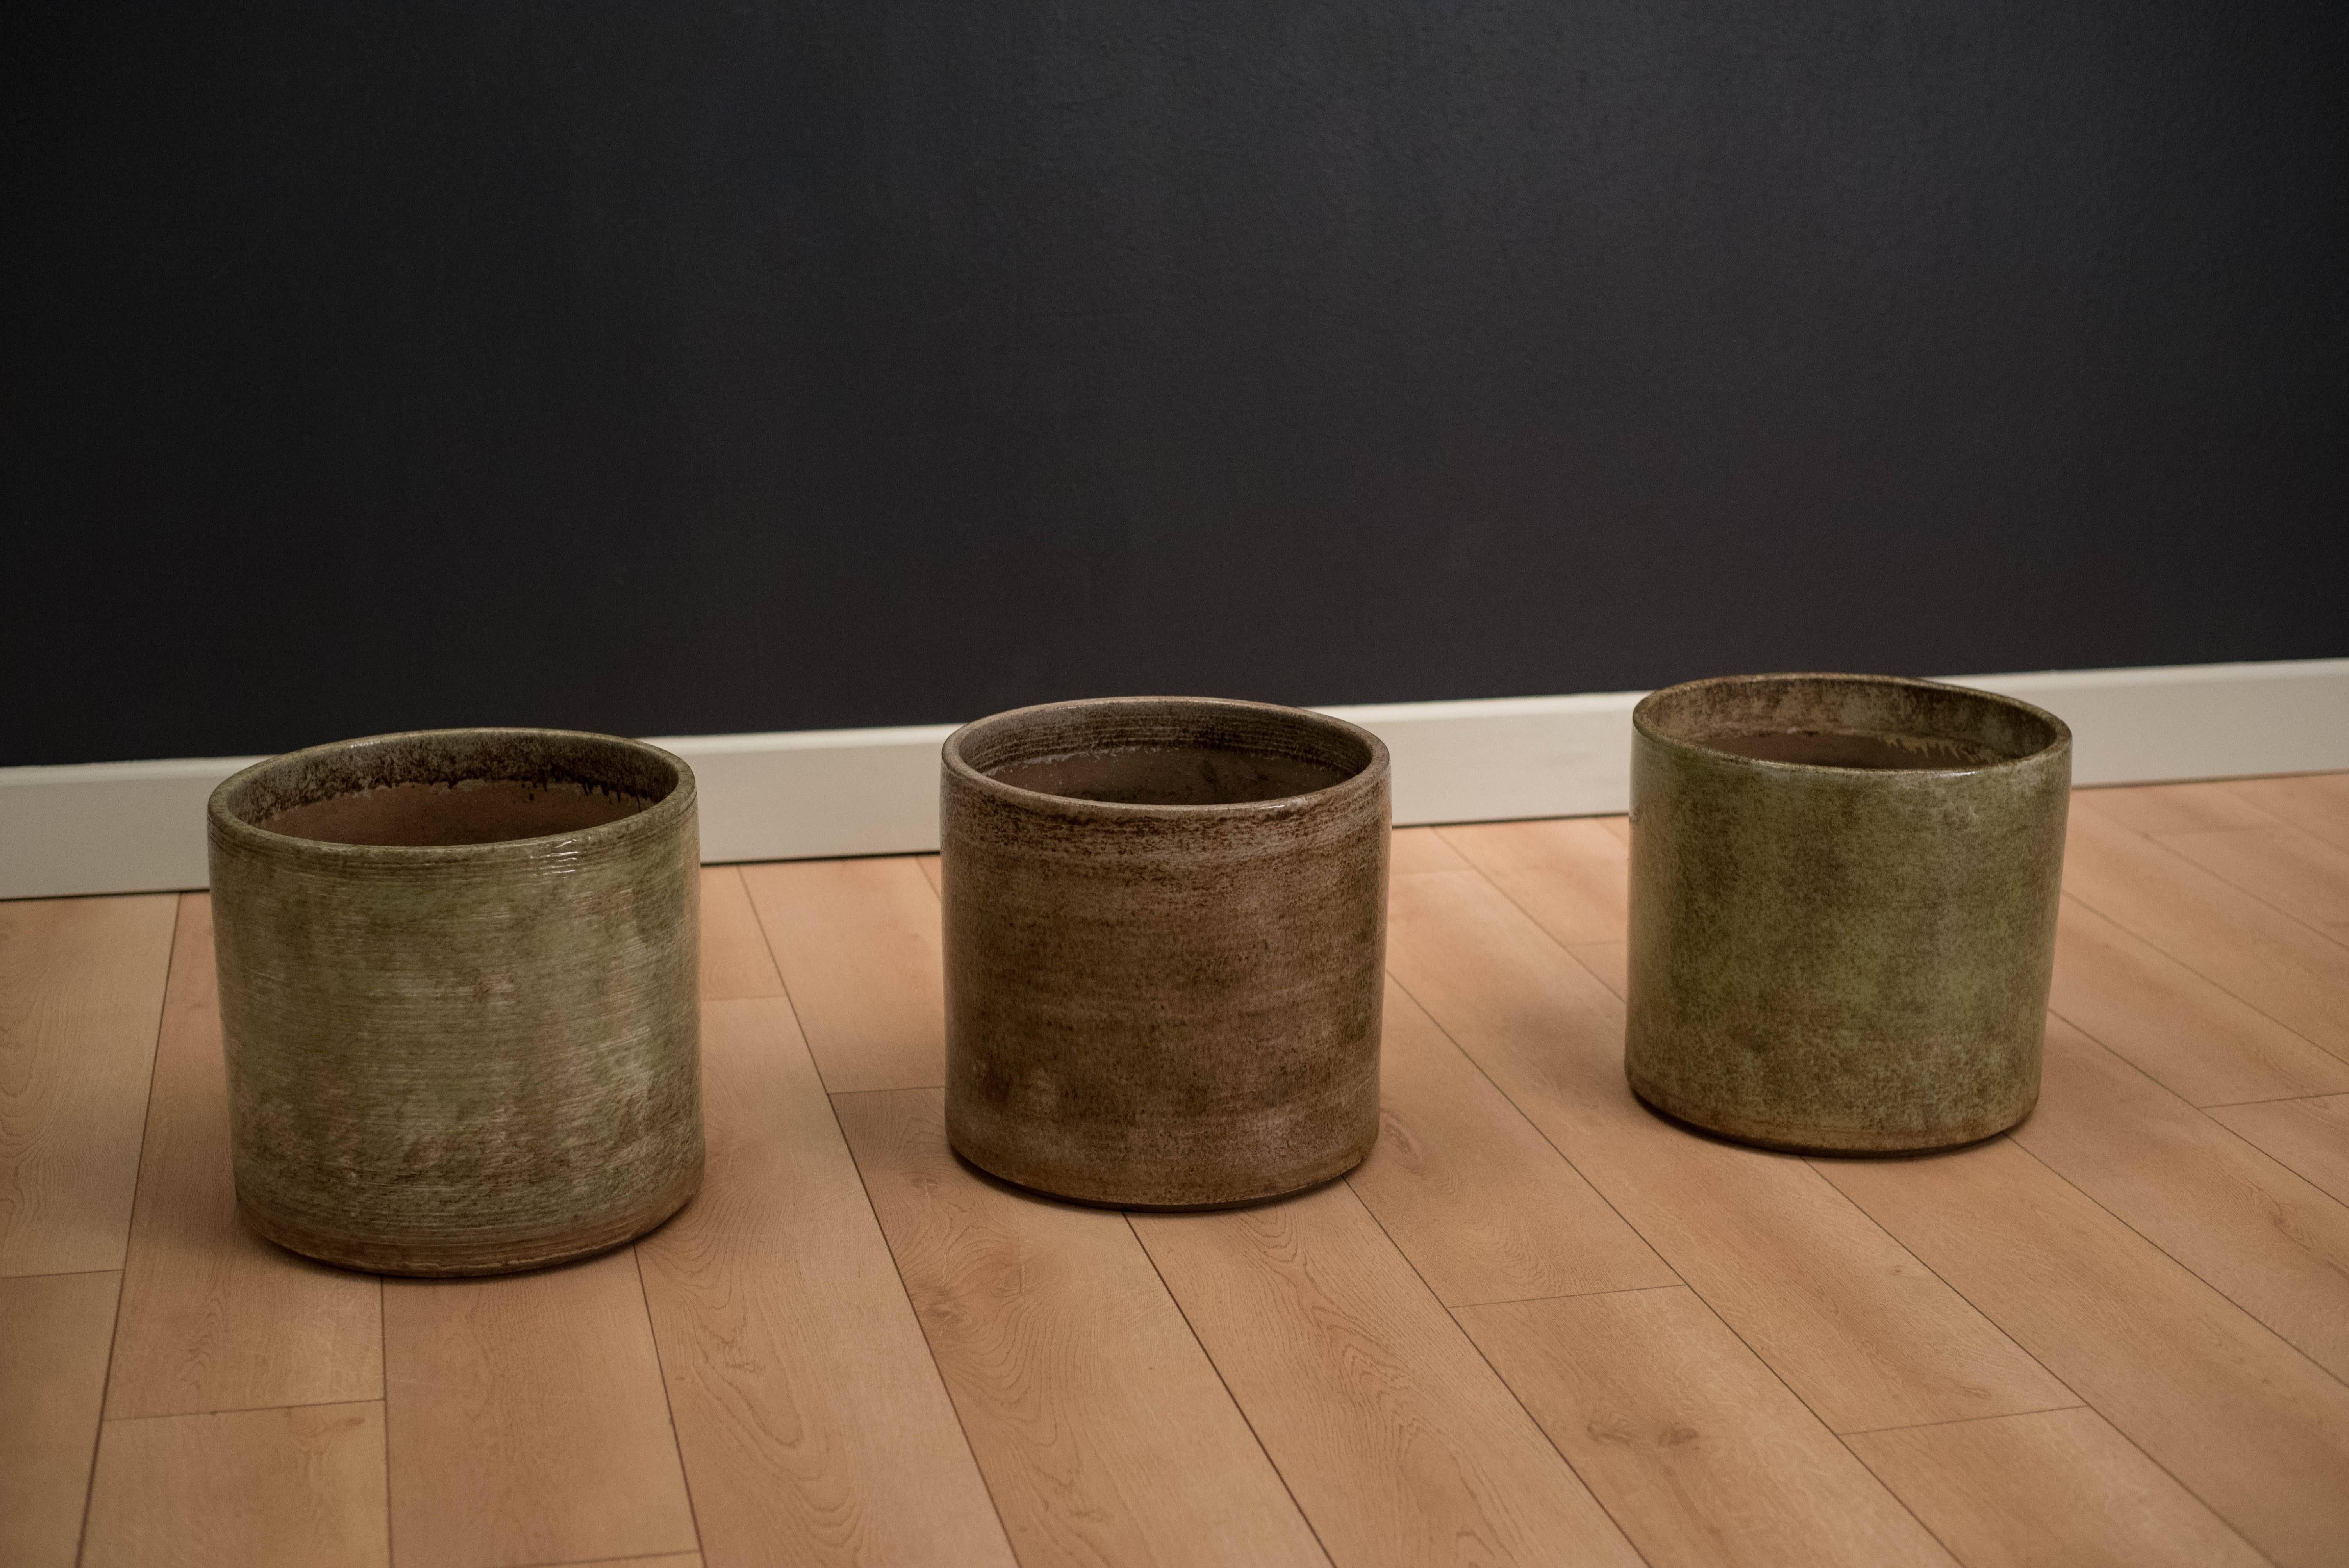 Mid-Century planter pots designed by Gainey Ceramics of La Verne, California. Each piece comes in a high gloss textured finish. Two are available in green, one in a neutral brown tone. Price is for each.
     
    